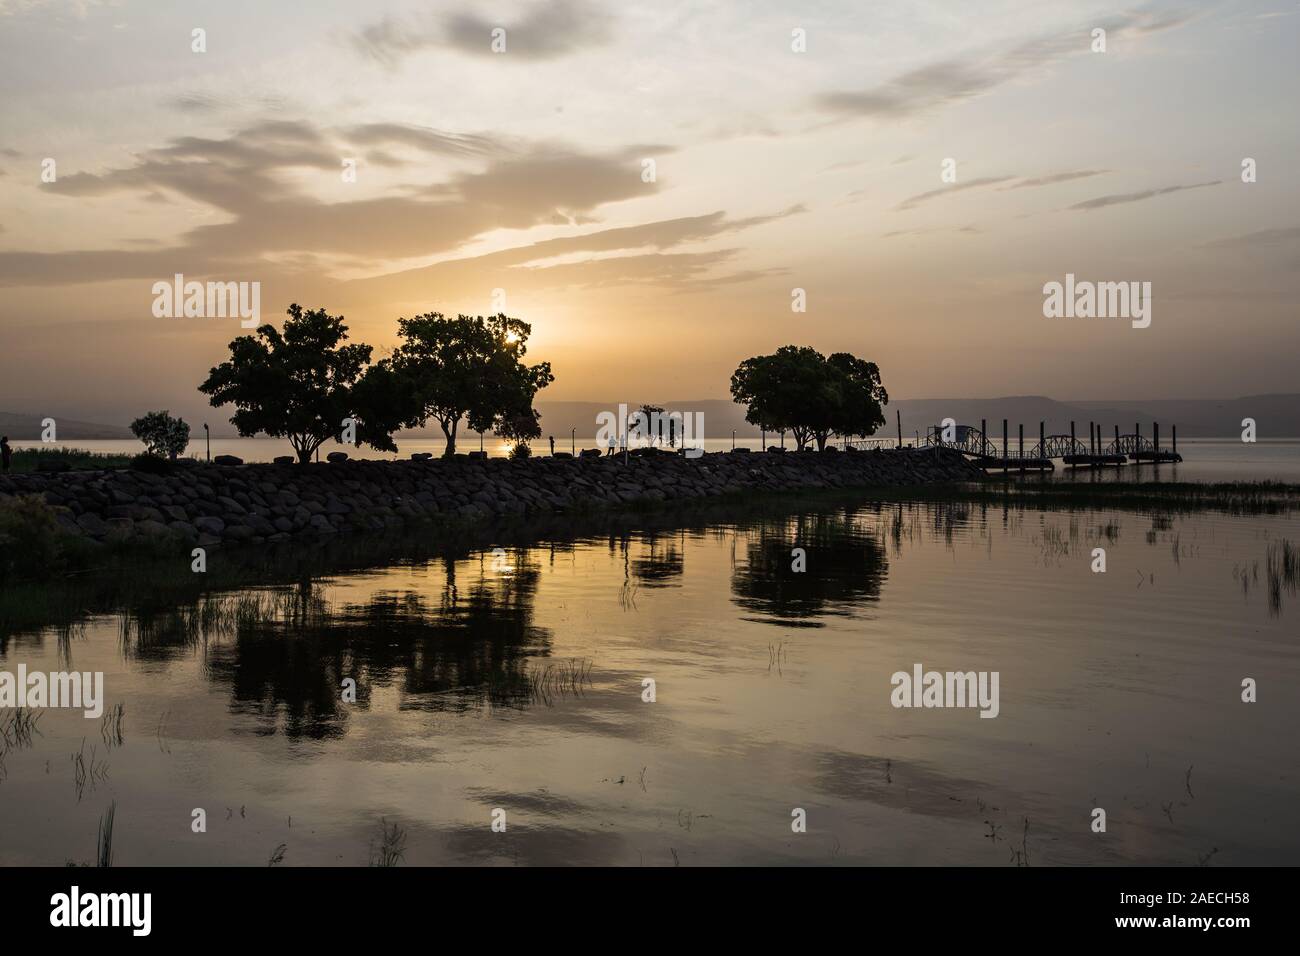 Sunrise at the Sea of Galilee.  The Sea of Galilee is one of the most familiar bodies of water in the Bible, especially to readers of the Gospels. Stock Photo